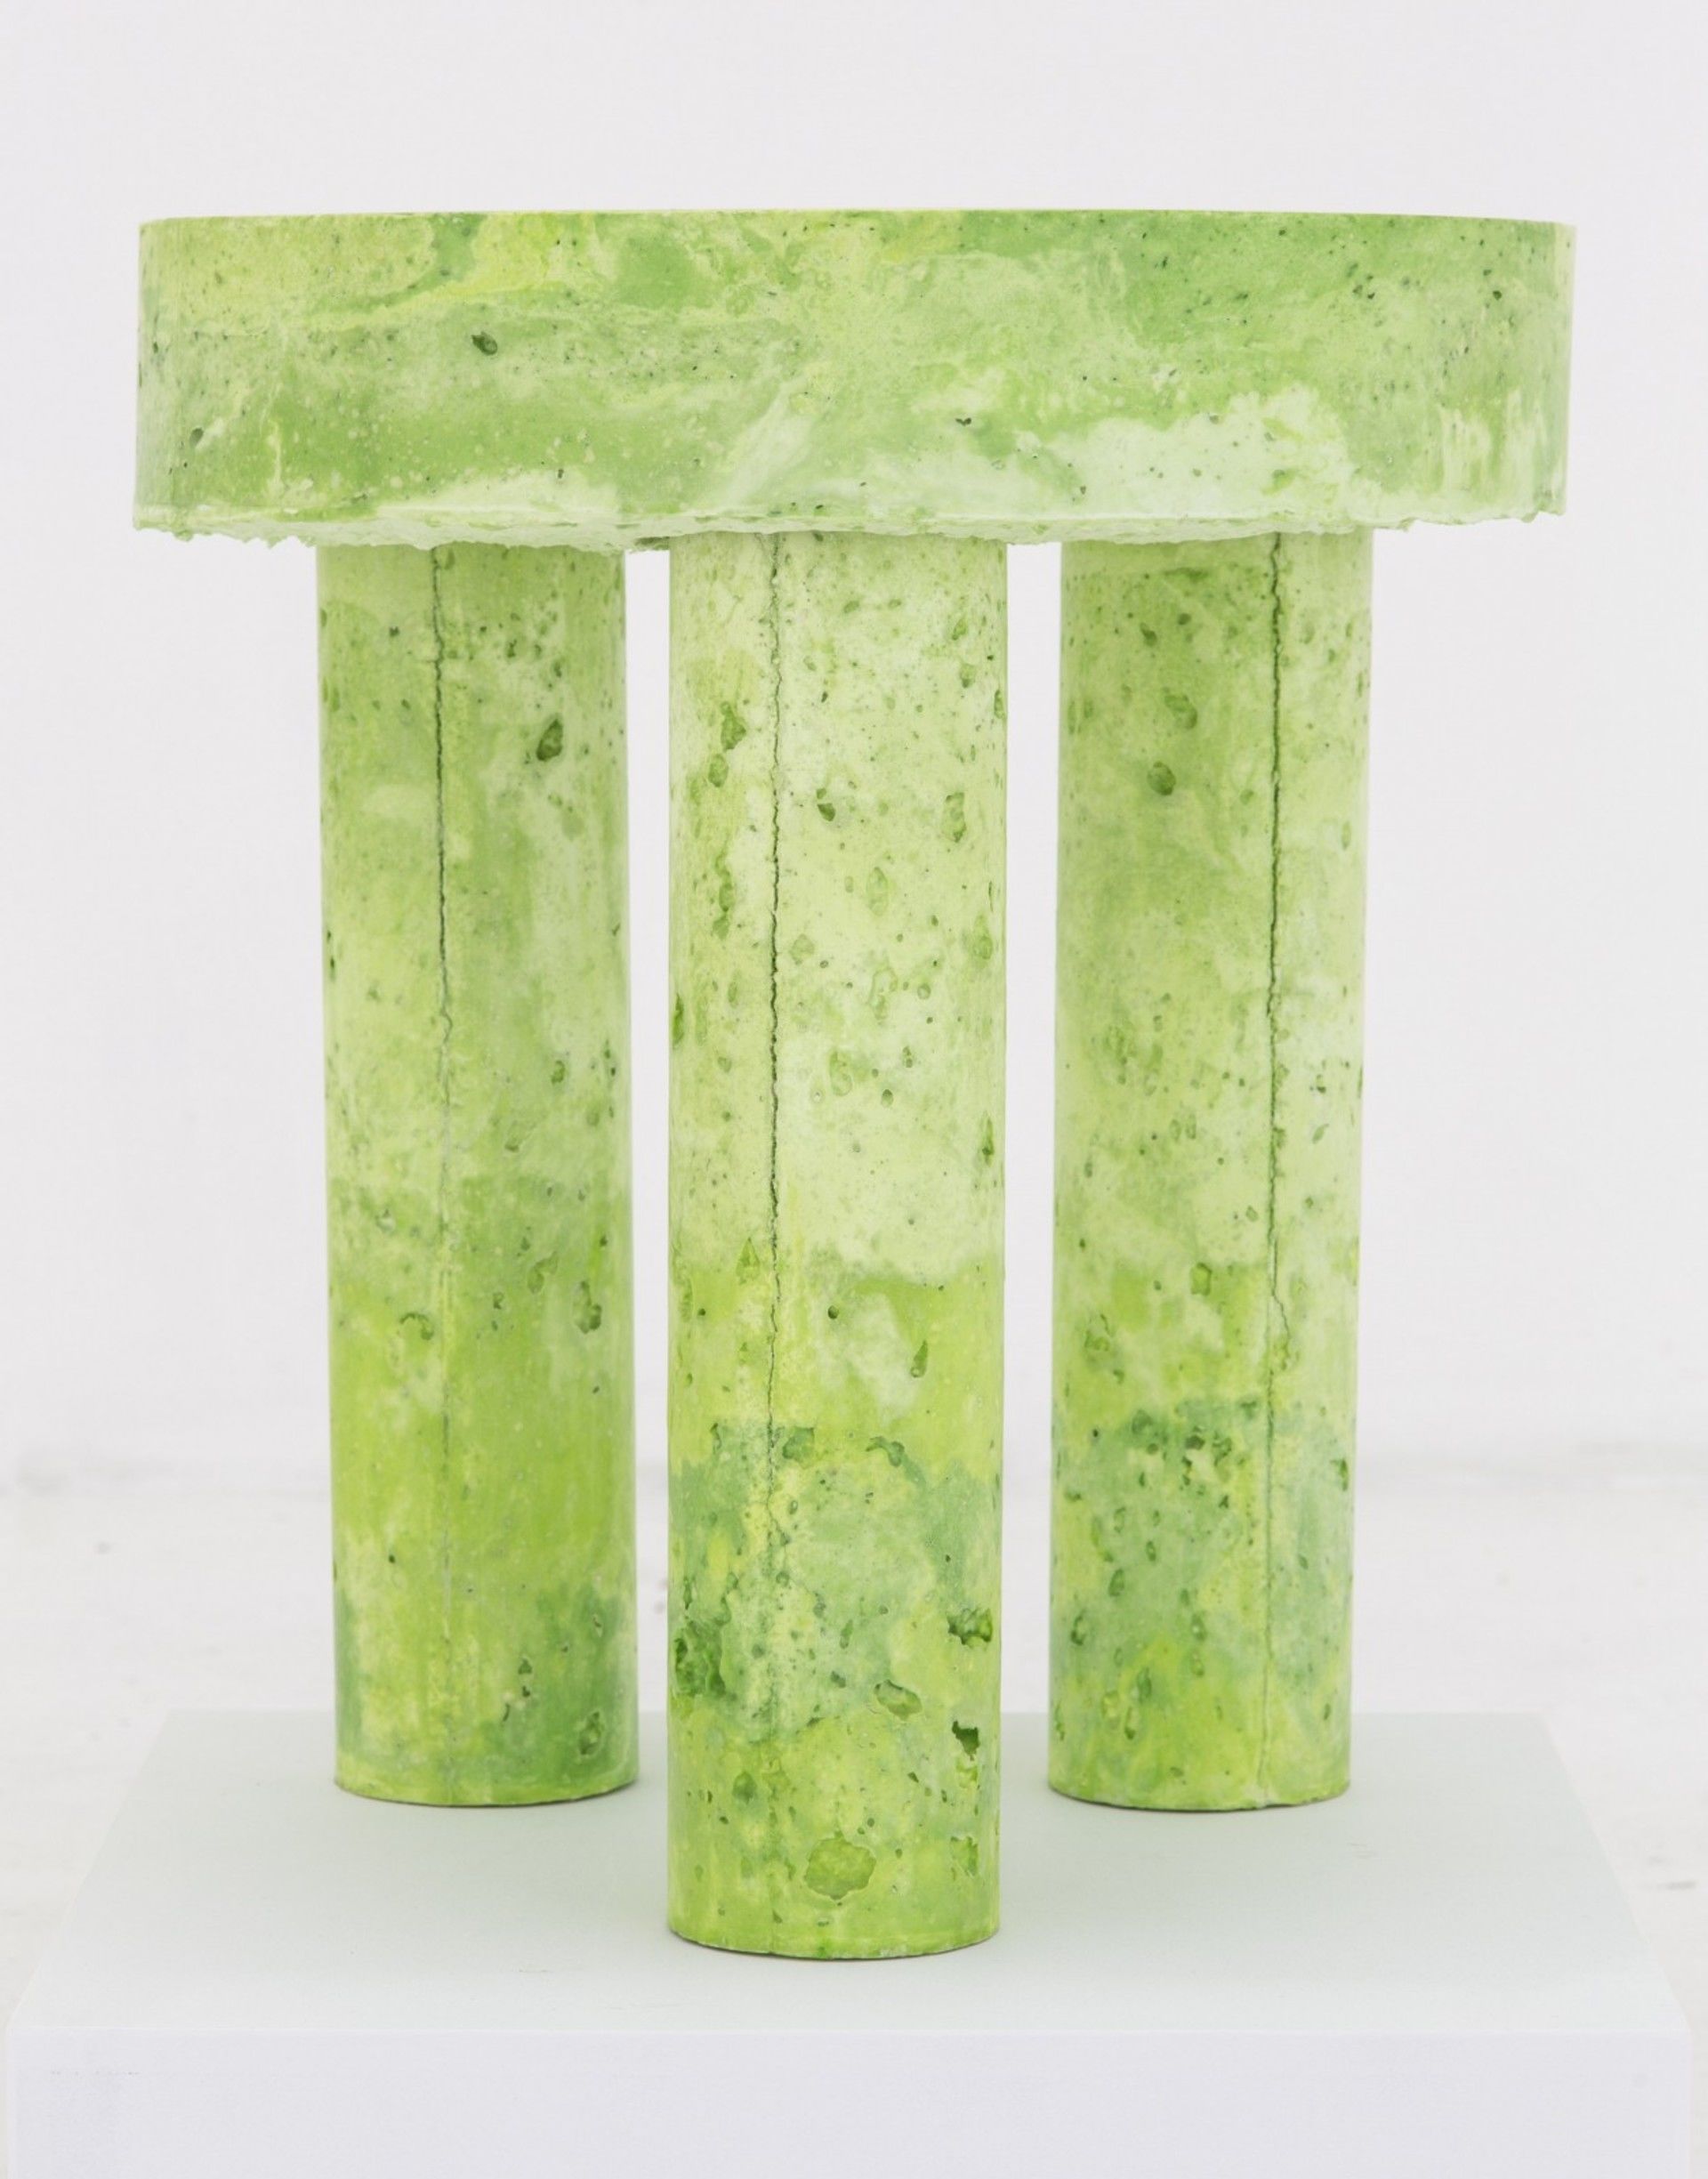 Green Pulp Table by Katie Stout for exhibition Docile/Domicile/Dandy at Gallery Diet, Miami 2015